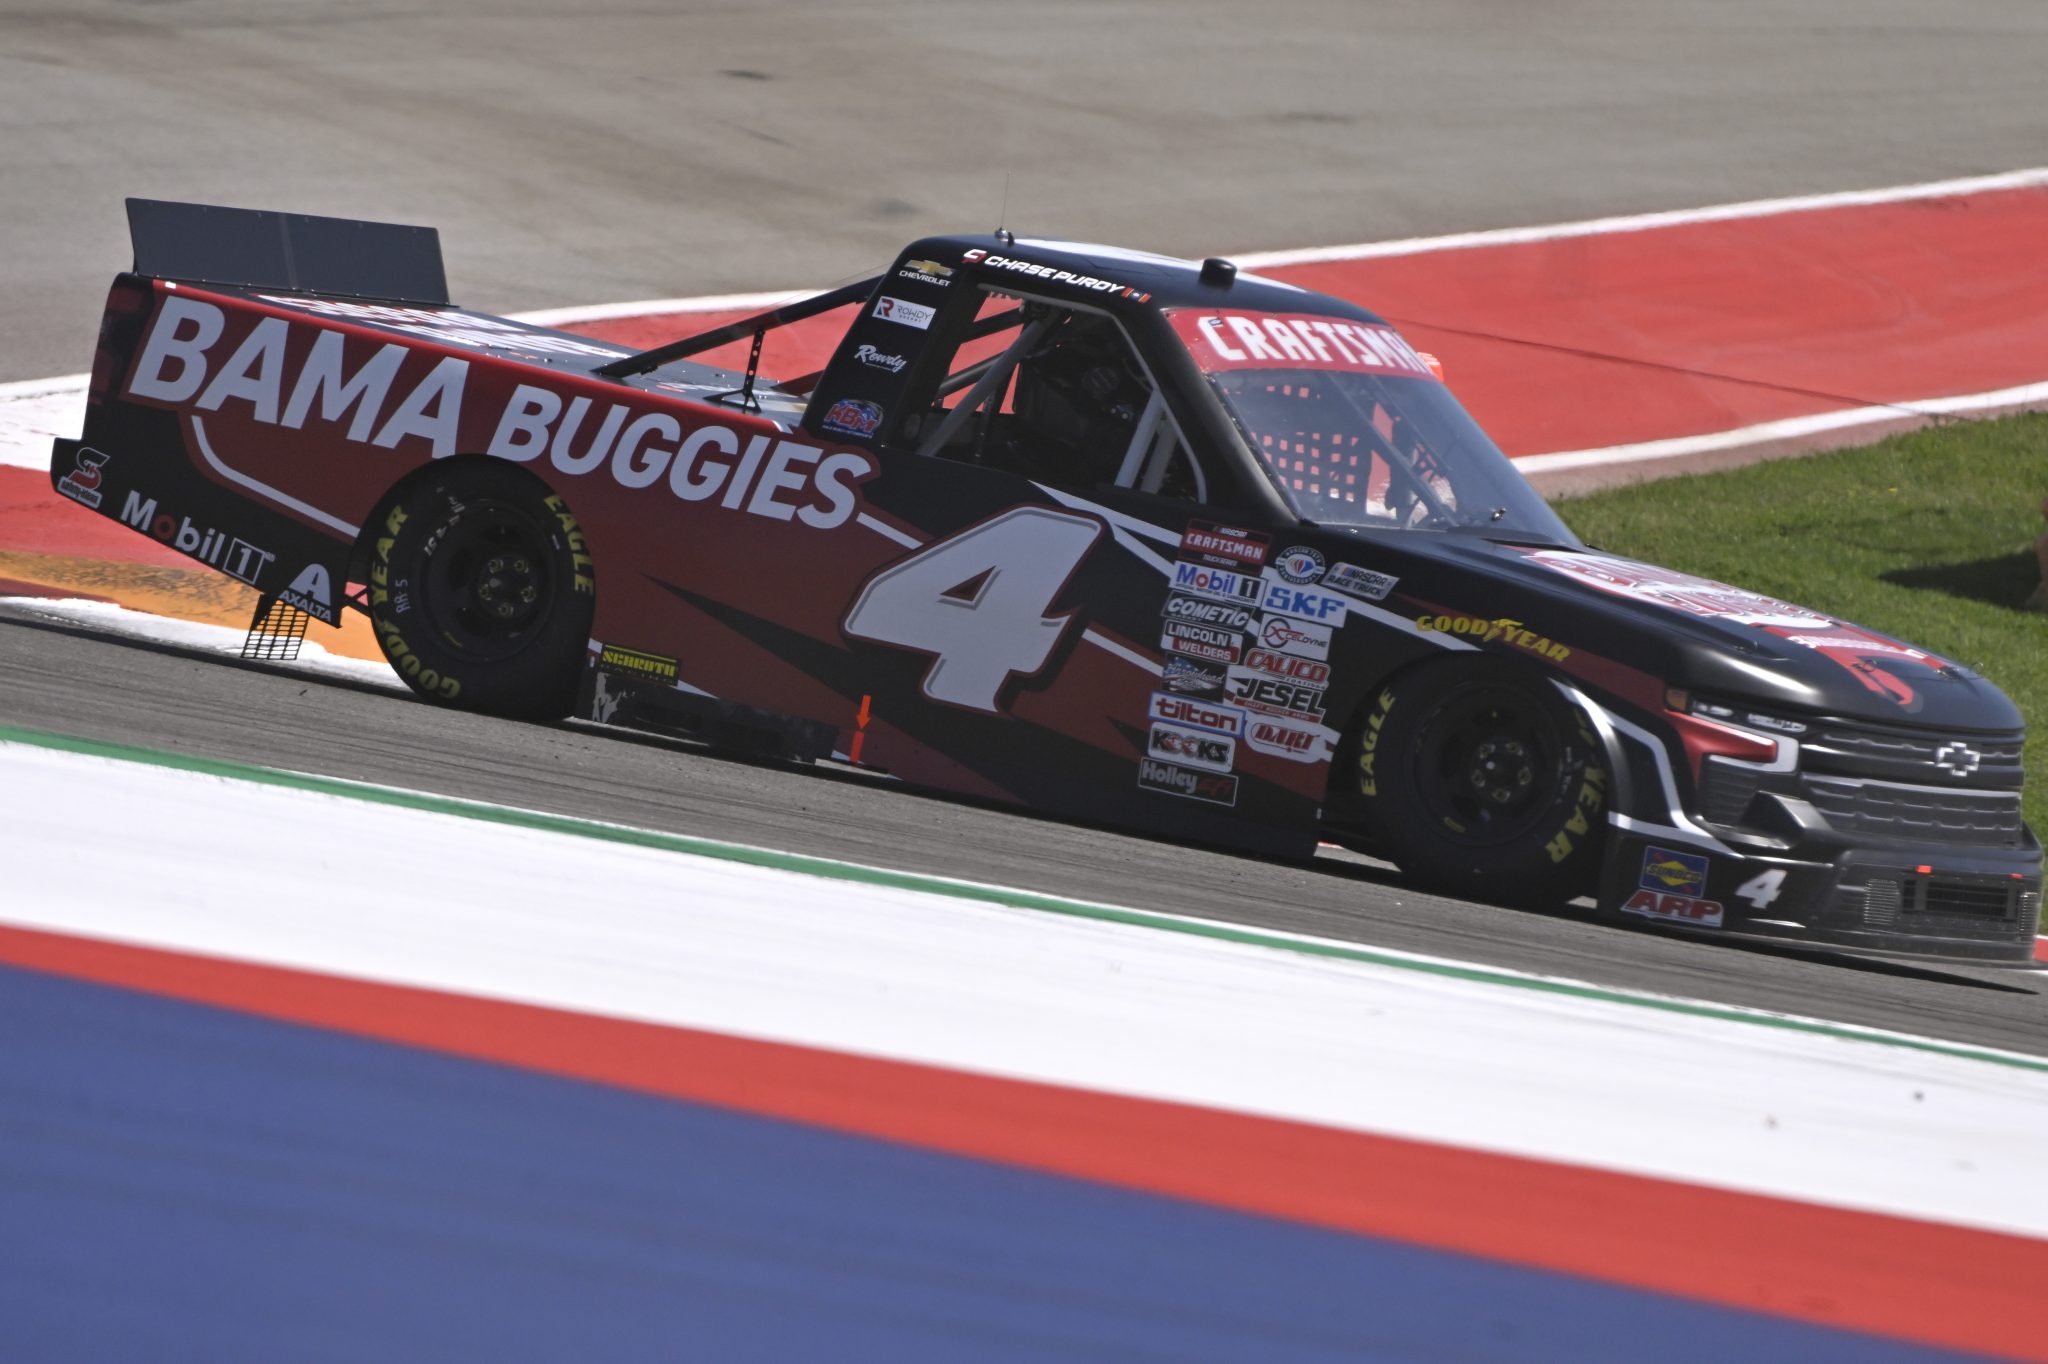 AUSTIN, TEXAS - MARCH 25: Chase Purdy, driver of the #4 Bama Buggies Chevrolet, drives during the NASCAR Craftsman Truck Series XPEL 225 at Circuit of The Americas on March 25, 2023 in Austin, Texas. (Photo by Logan Riely/Getty Images) | Getty Images